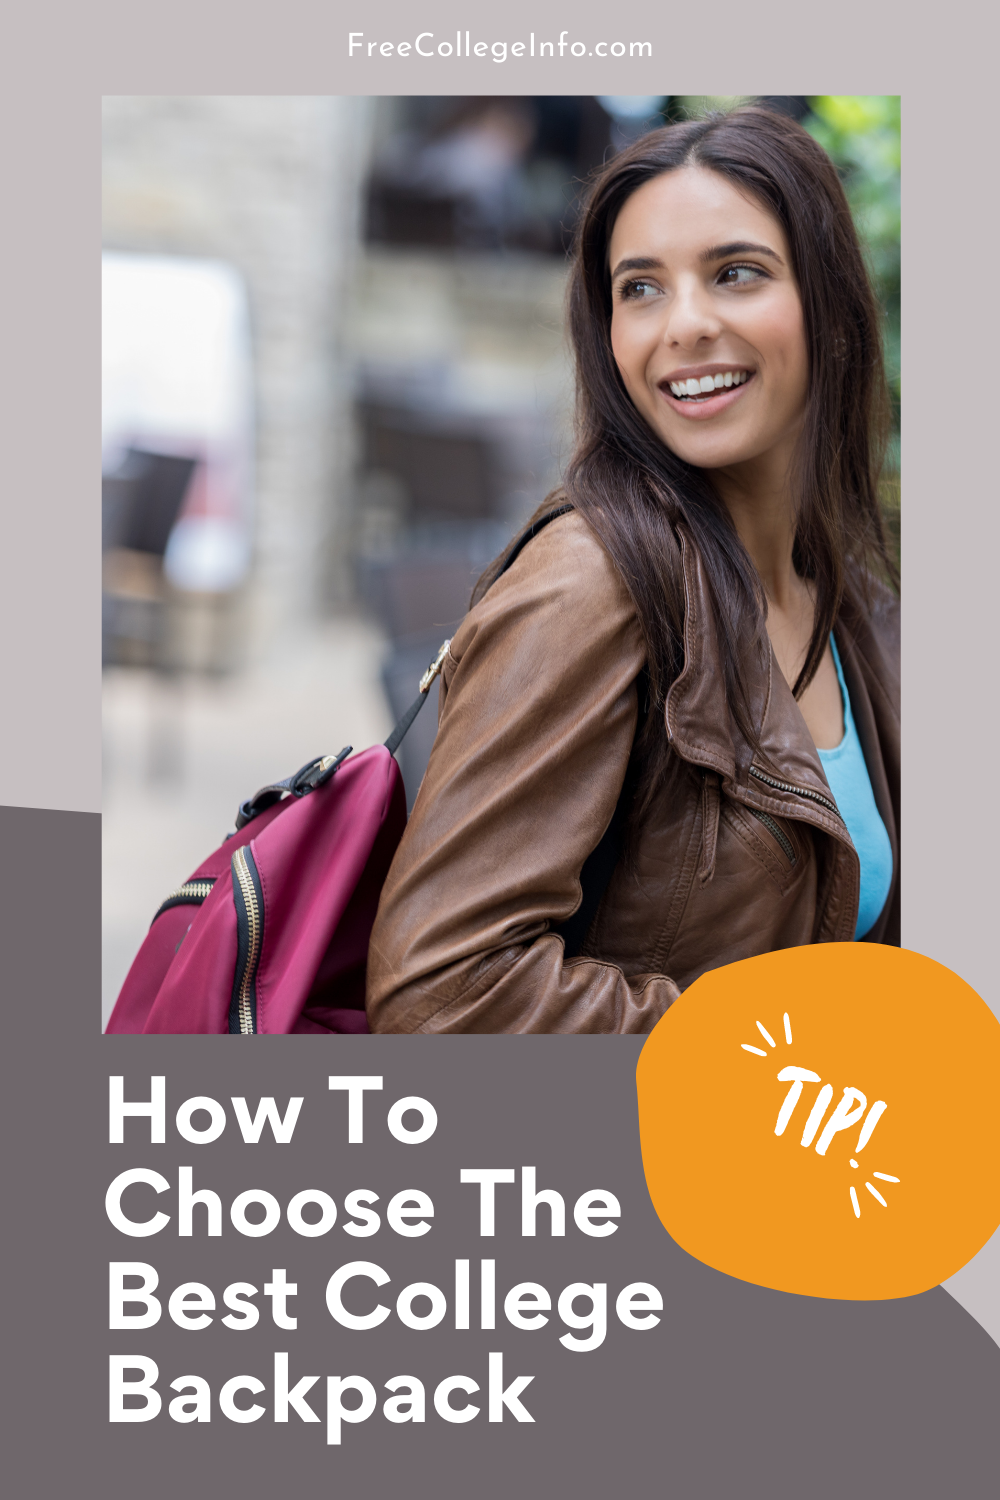 How To Choose The Best College Backpack